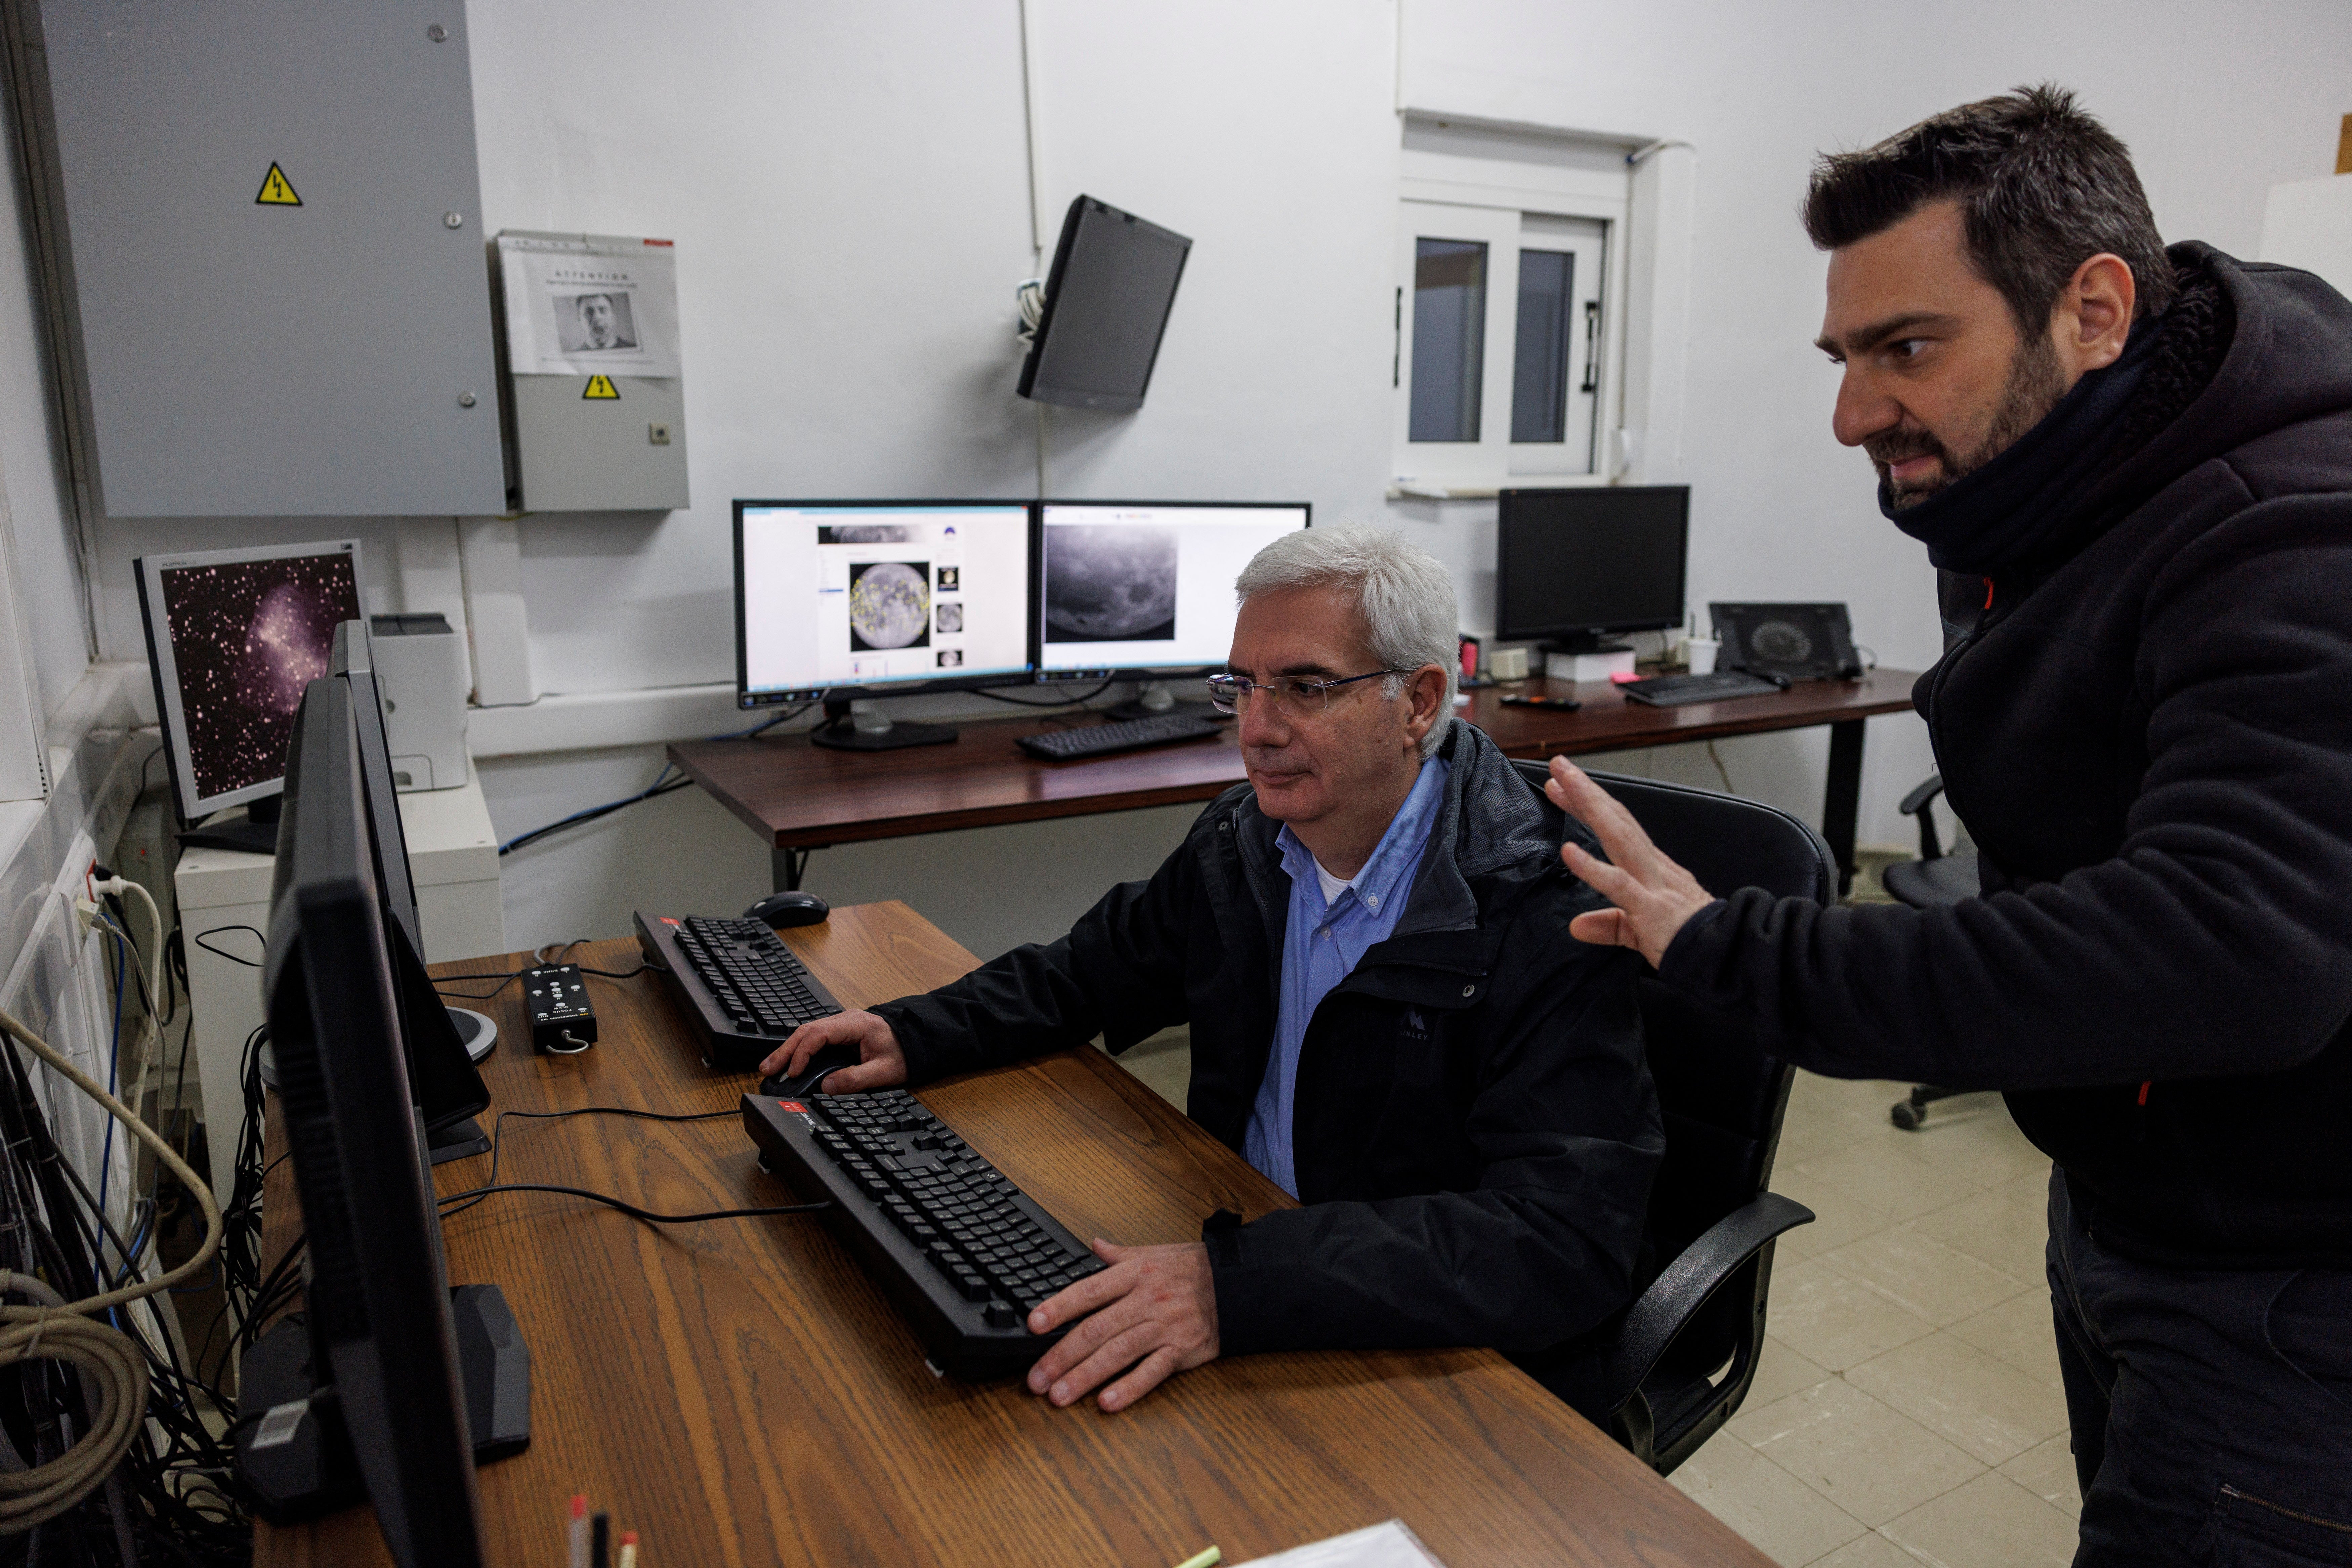 Post doctoral researcher Alexios Liakos talks to senior researcher Manolis Xylouris, as they track a green comet named Comet C/2022 E3 (ZTF) from the telescope of the Kryoneri observatory, in Kryoneri, Greece, February 1, 2023.